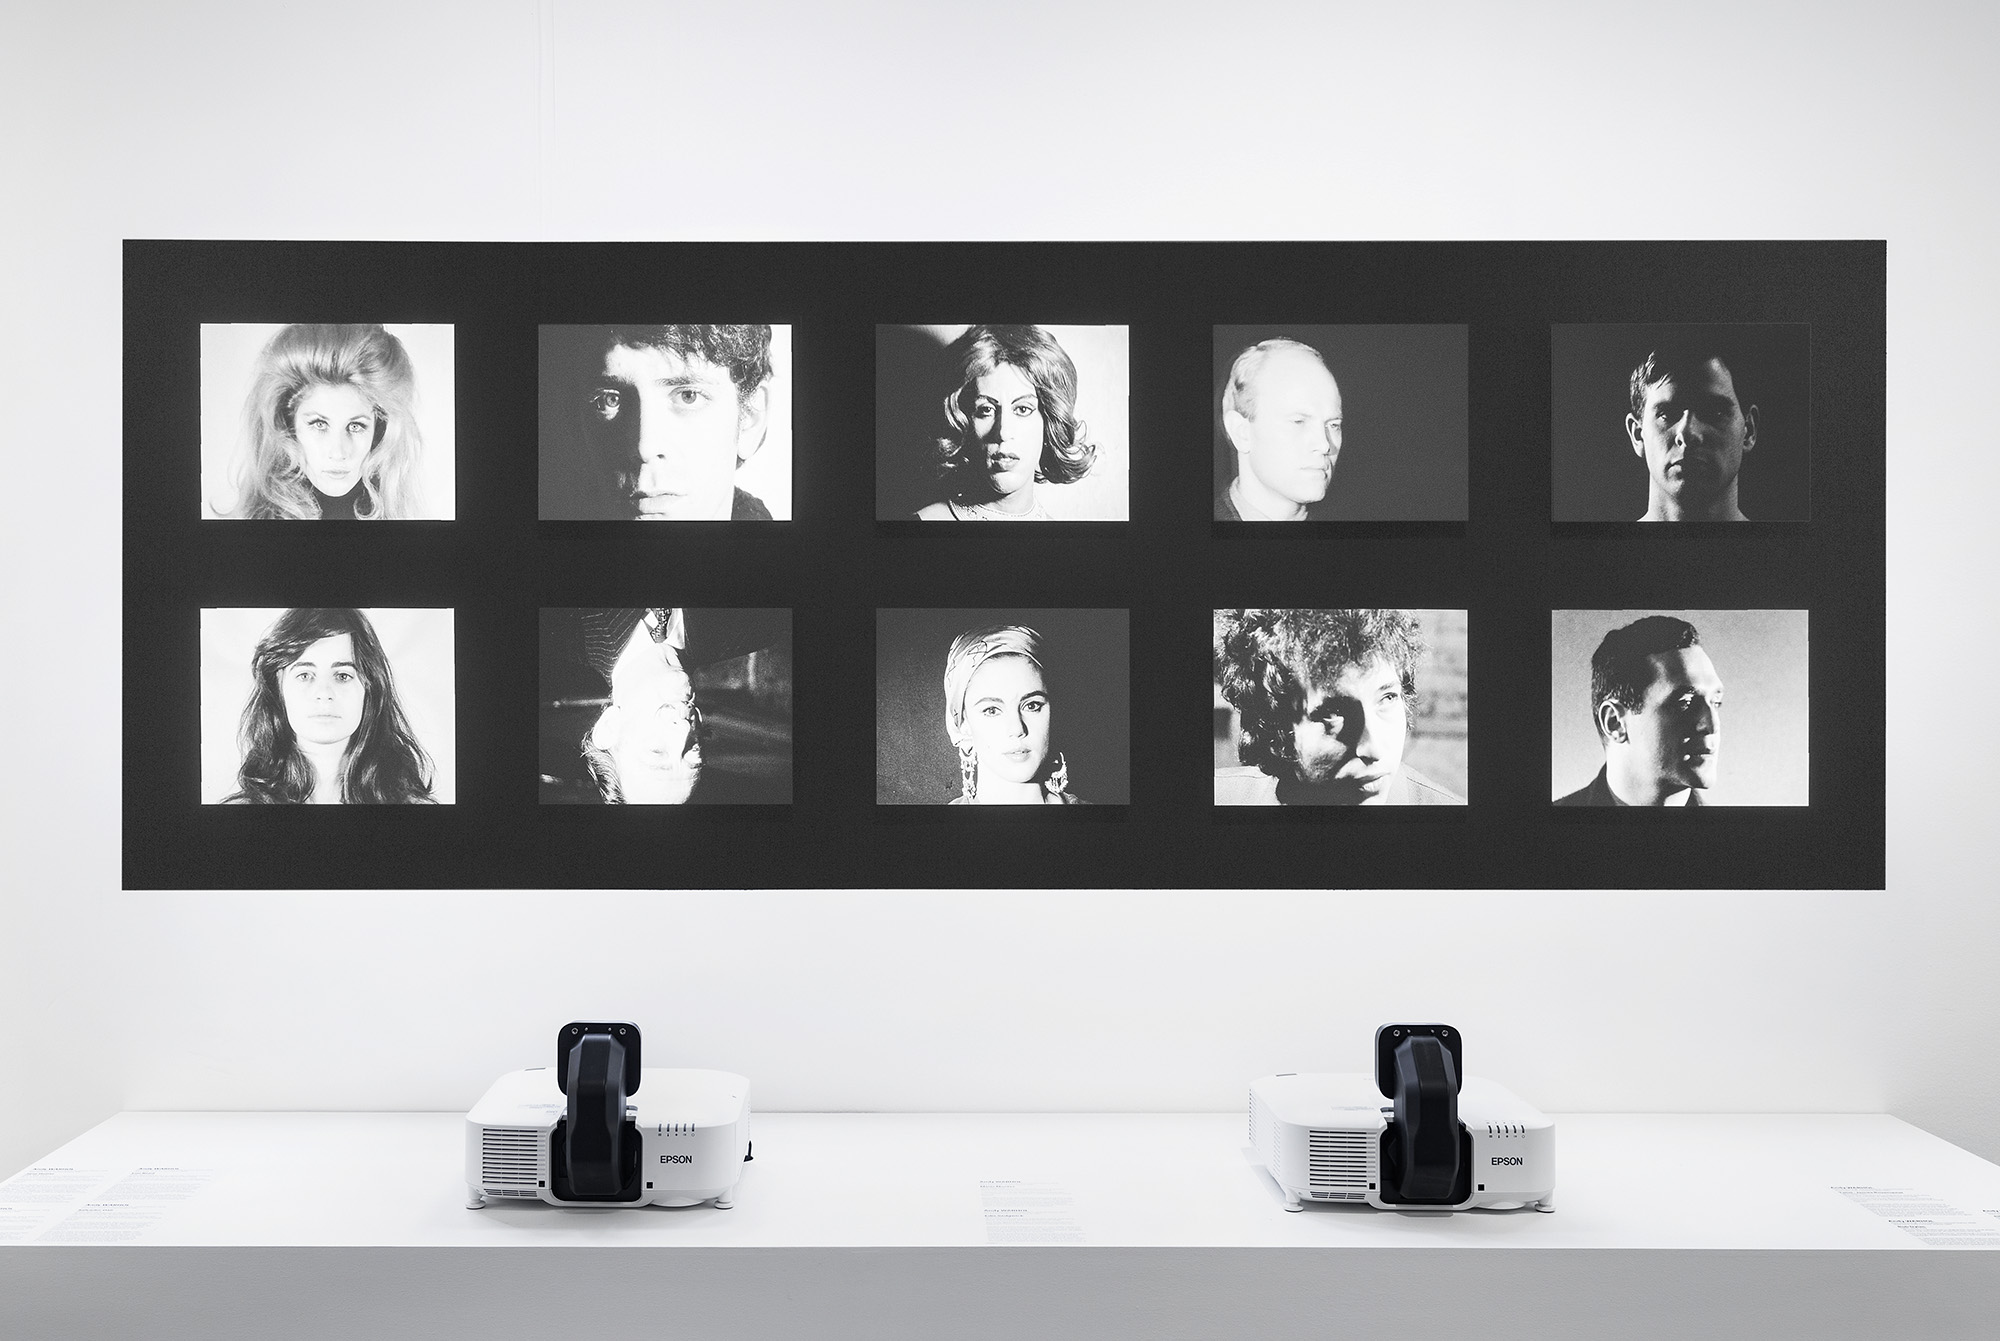 Installation view of <em>Andy Warhol and Photography: A Social Media</em>, Art Gallery of South Australia, Adelaide. Photo: Saul Steed